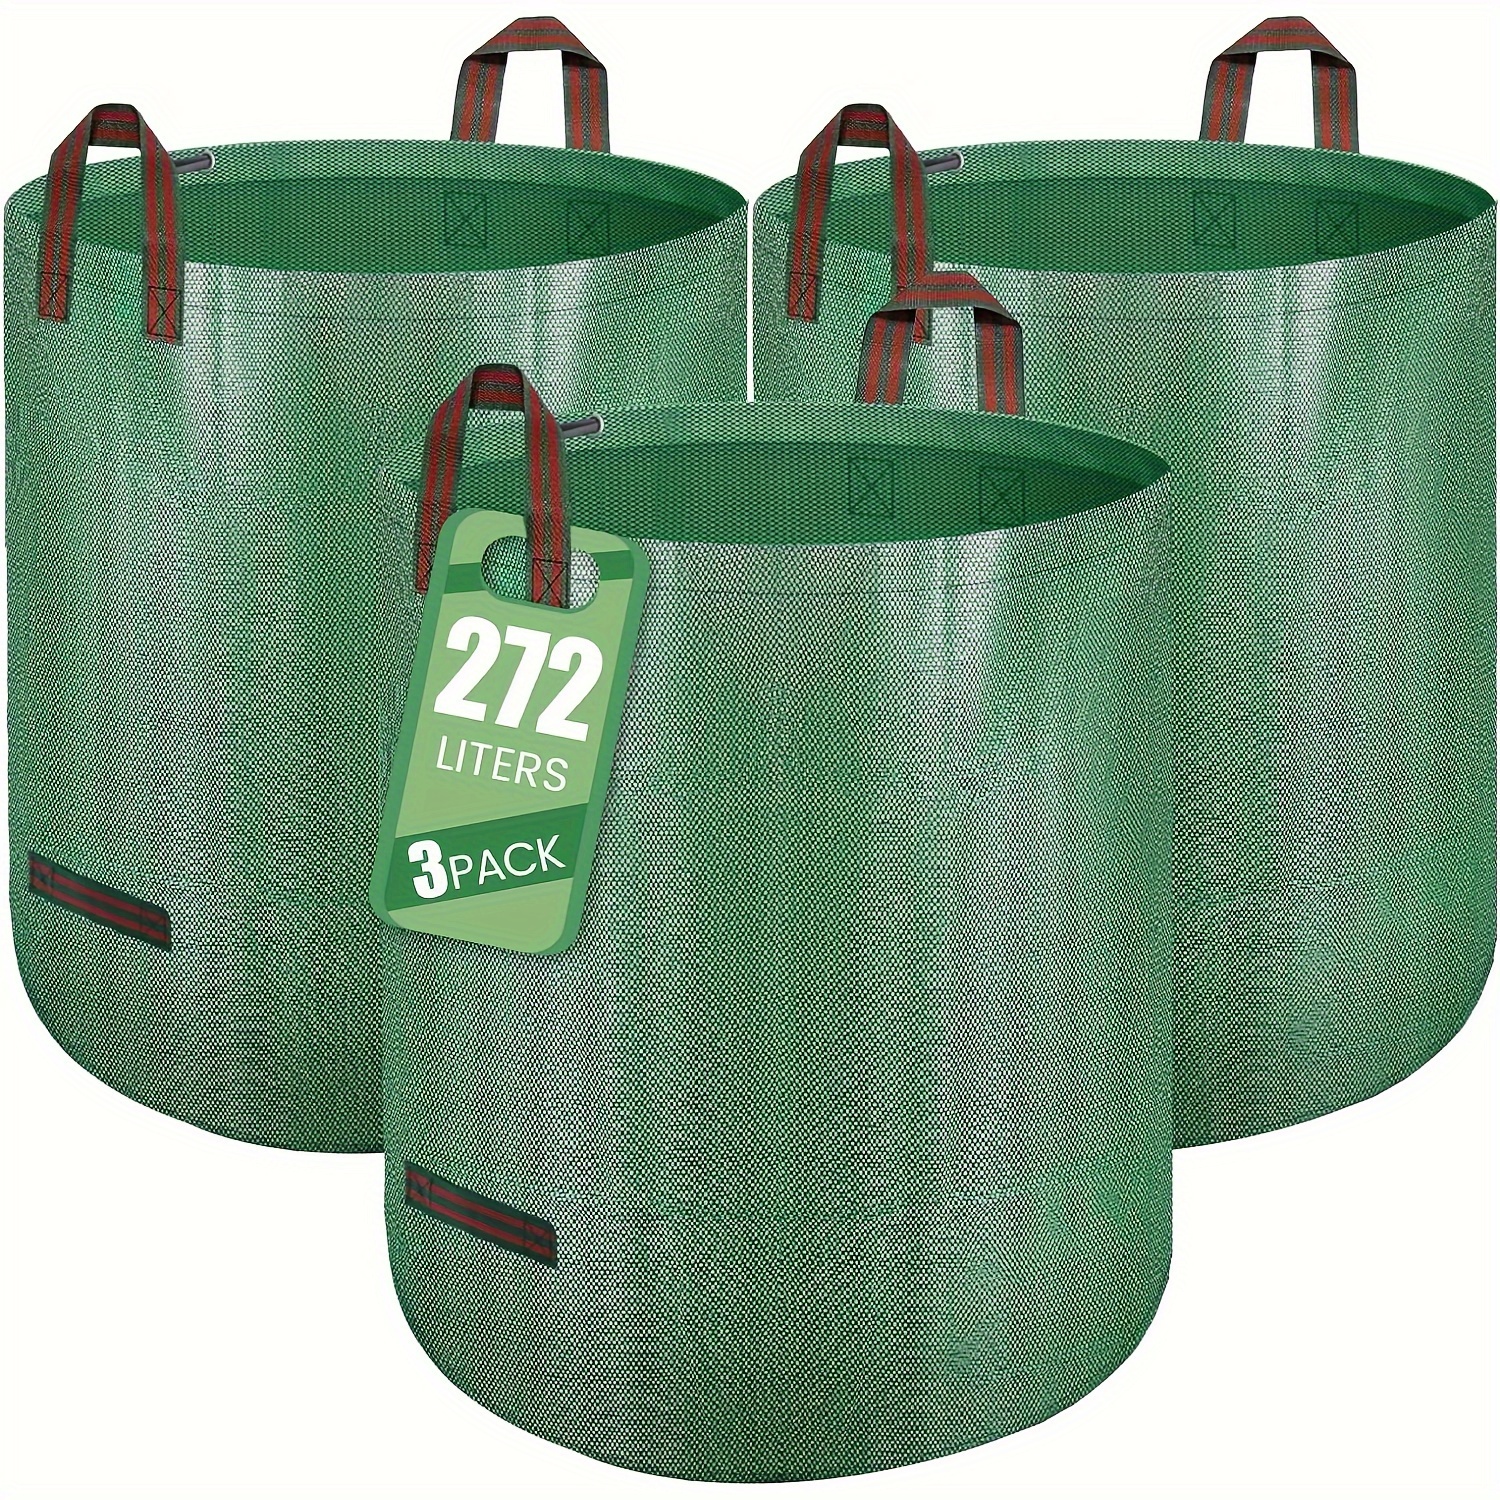 

3-piece Heavy-duty Reusable Yard Waste Bags, 72 Gallon With Reinforced Handles - Foldable Leaf Collection Bags For Garden Cleanup, Green Garden Bags For Plants Garden Bags